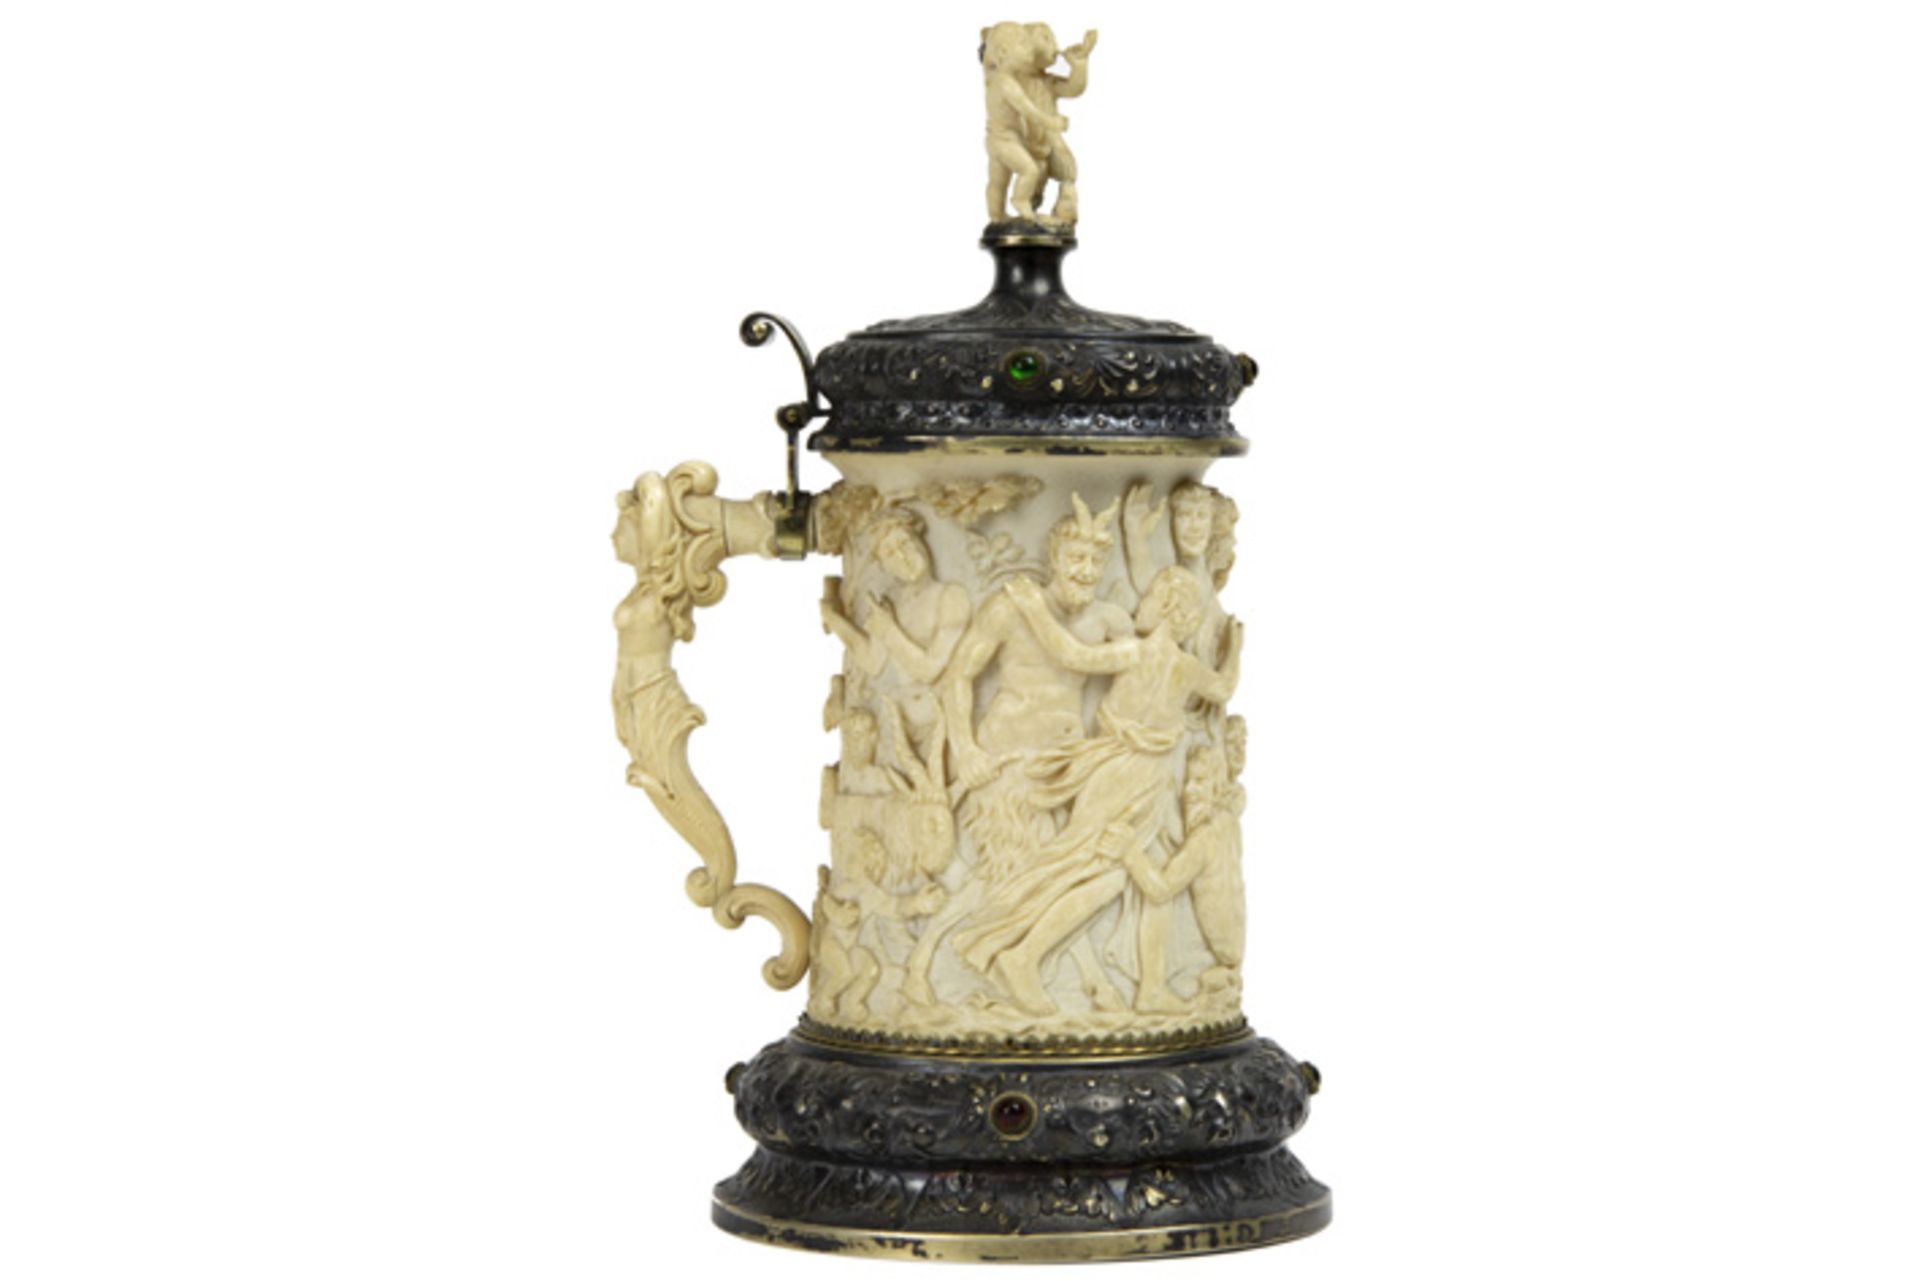 good antique German Renaissance style goblet in ivory and silver - the corpus has a frieze with